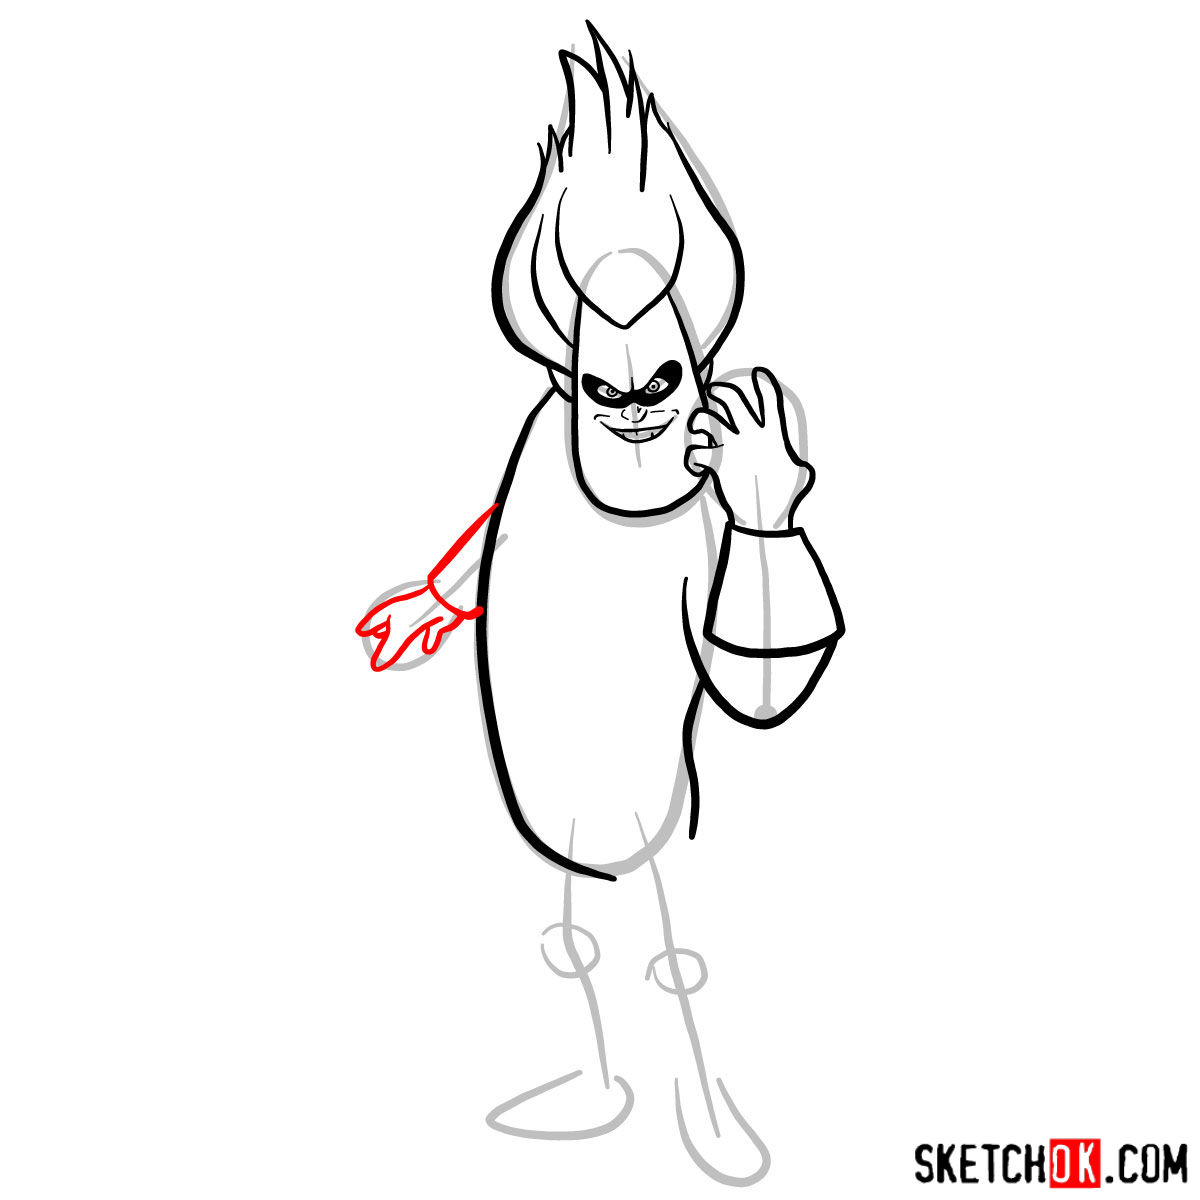 How to draw Buddy Pine (Syndrome) from The Incredibles - step 08